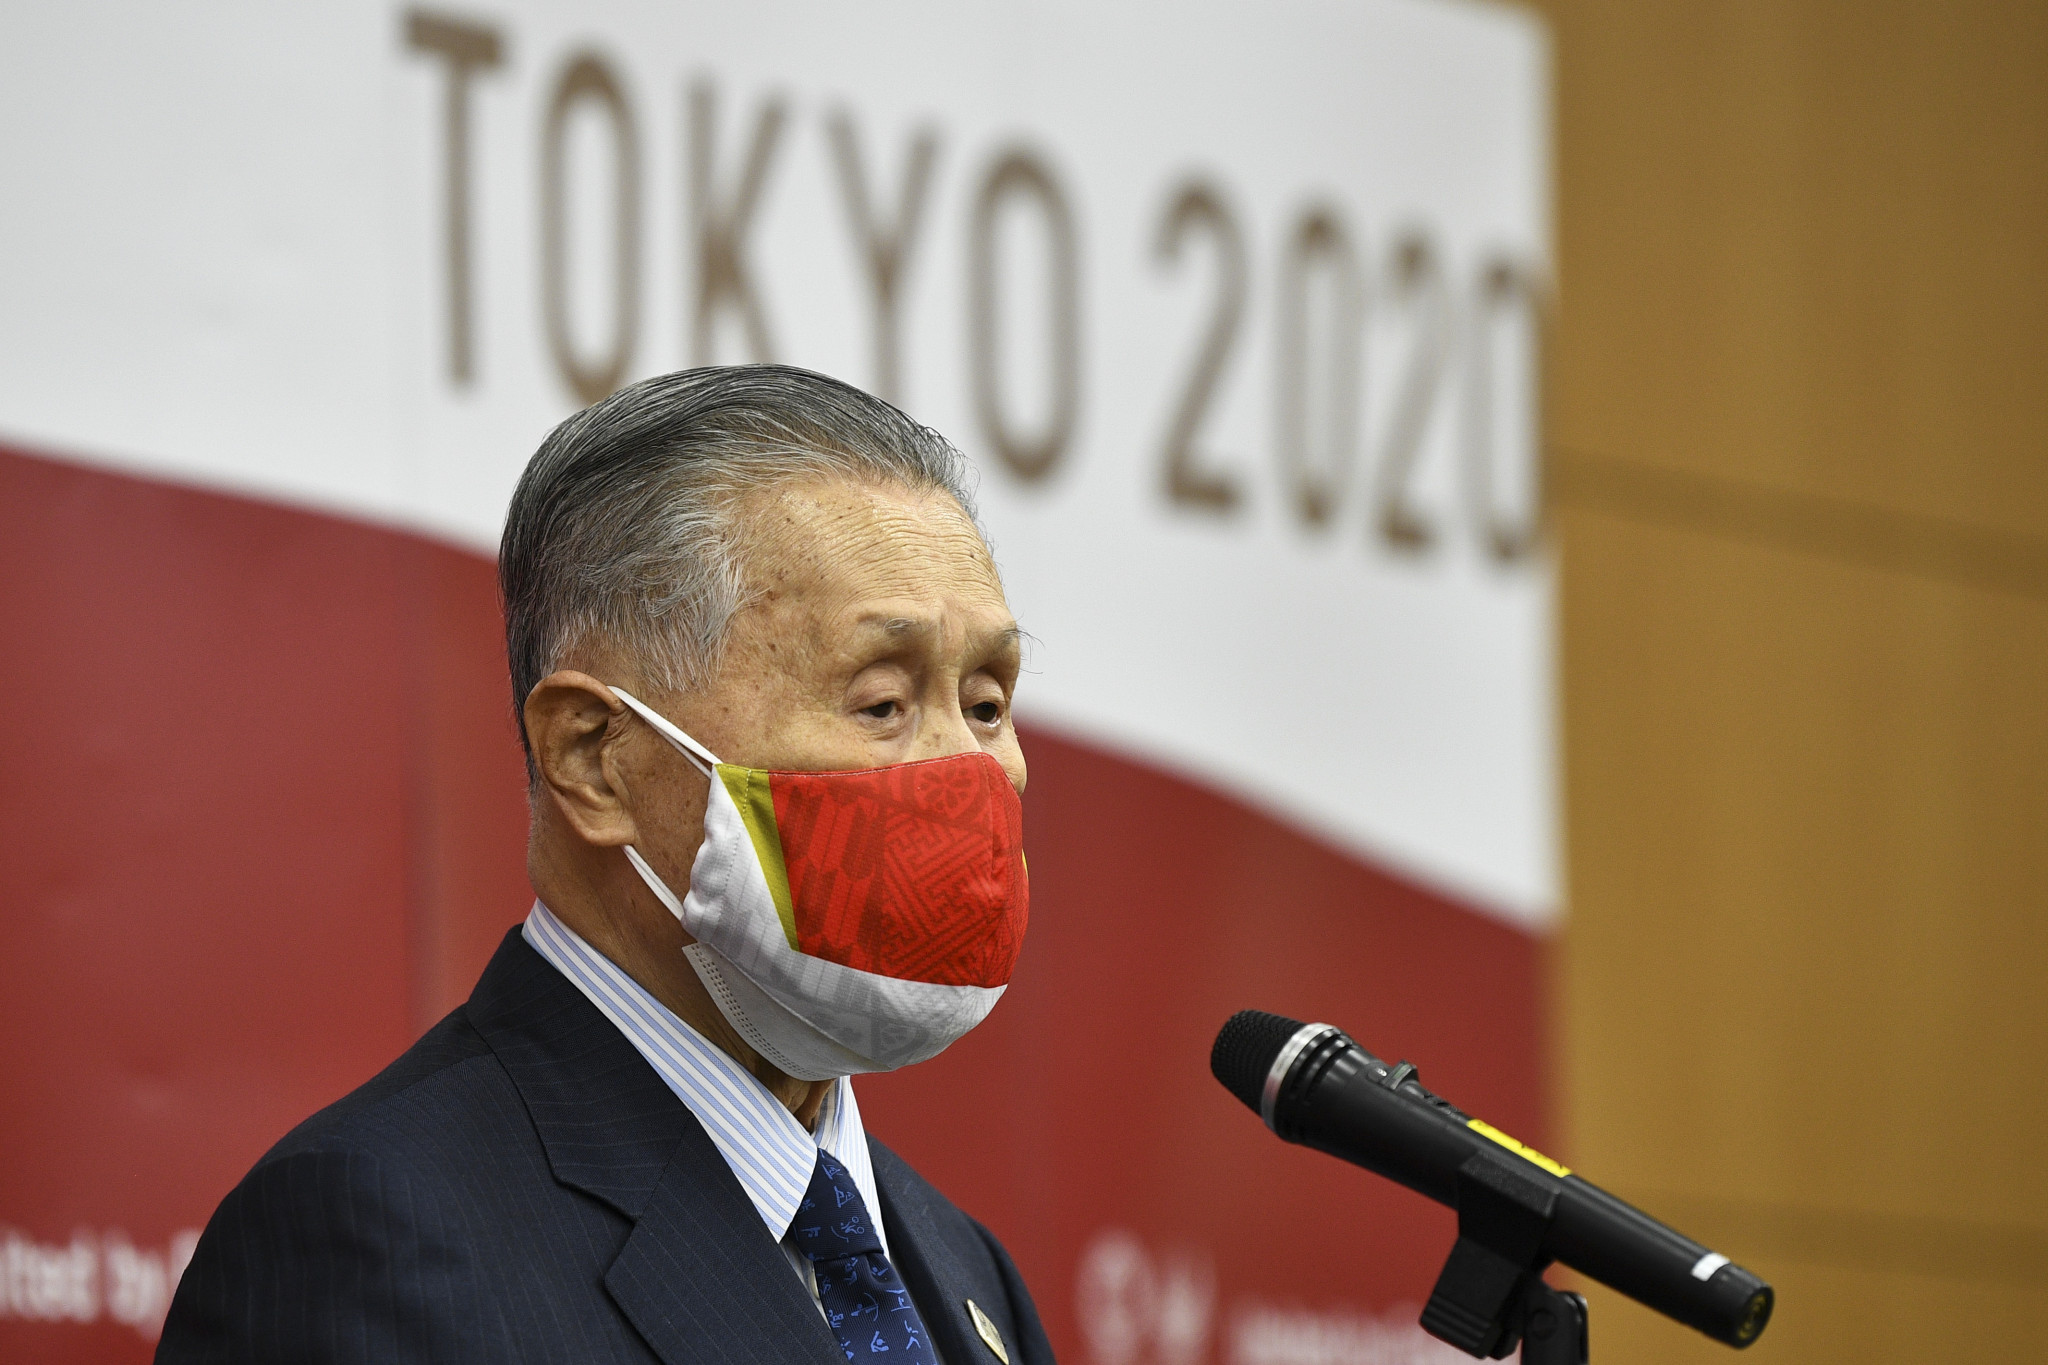 Tokyo 2020 President Yoshirō Mori thanked the domestic partners for their support during the global health crisis ©Getty Images